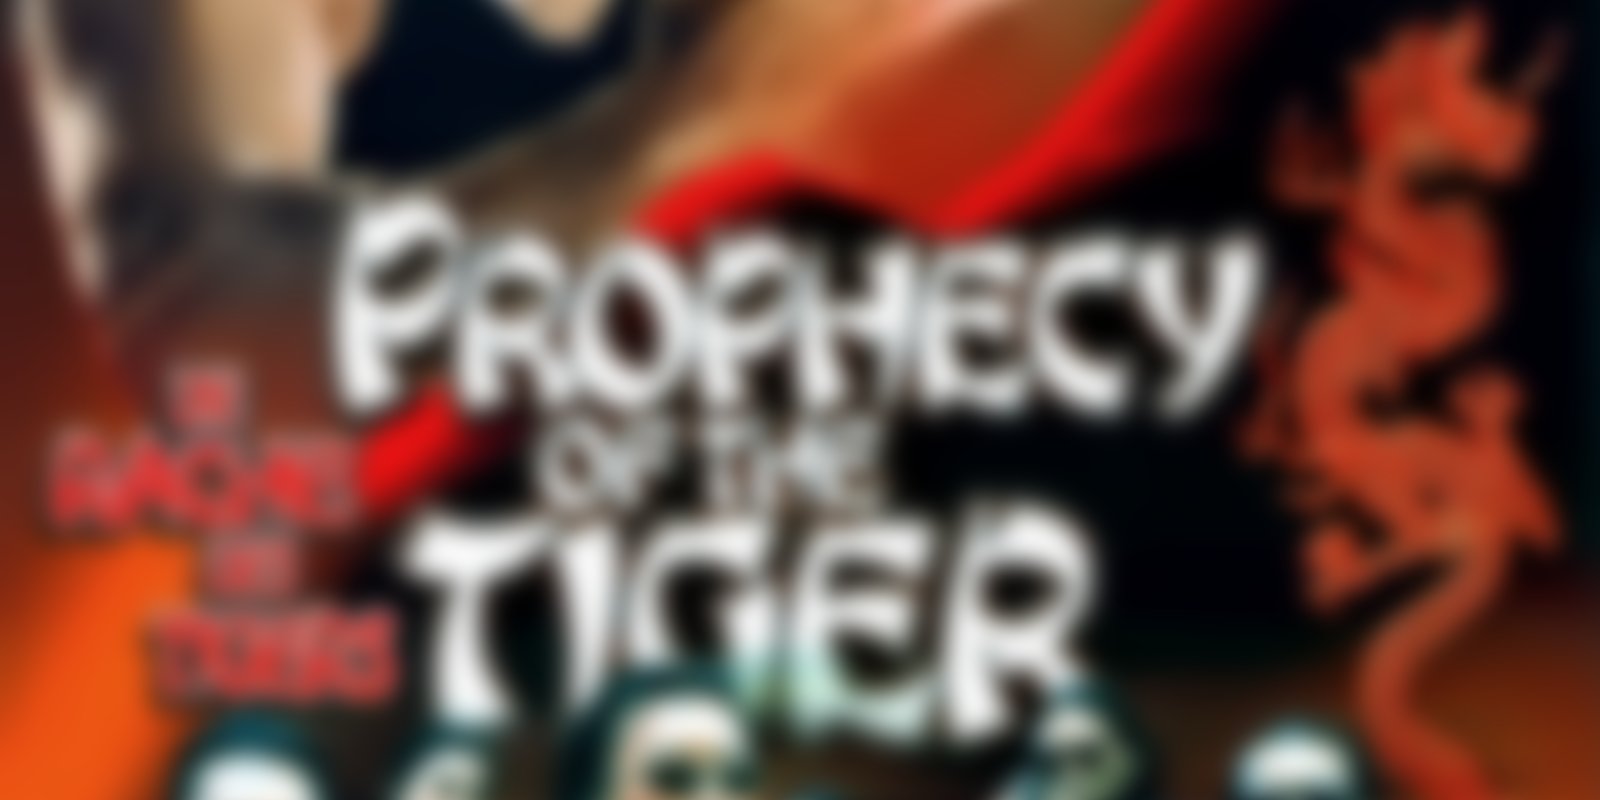 Prophecy of the Tiger